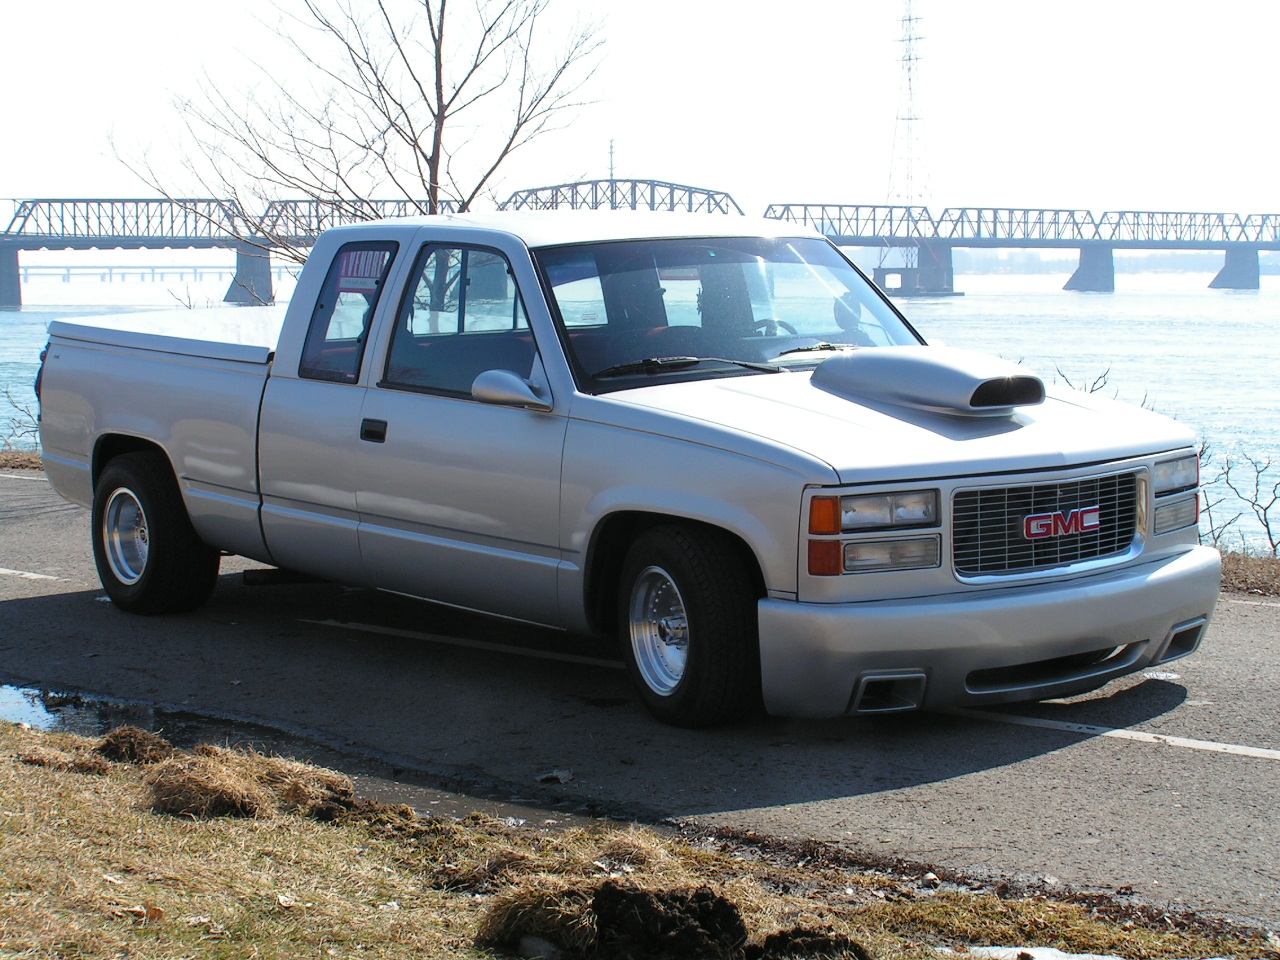 1991 Gmc extended cab pickup #4